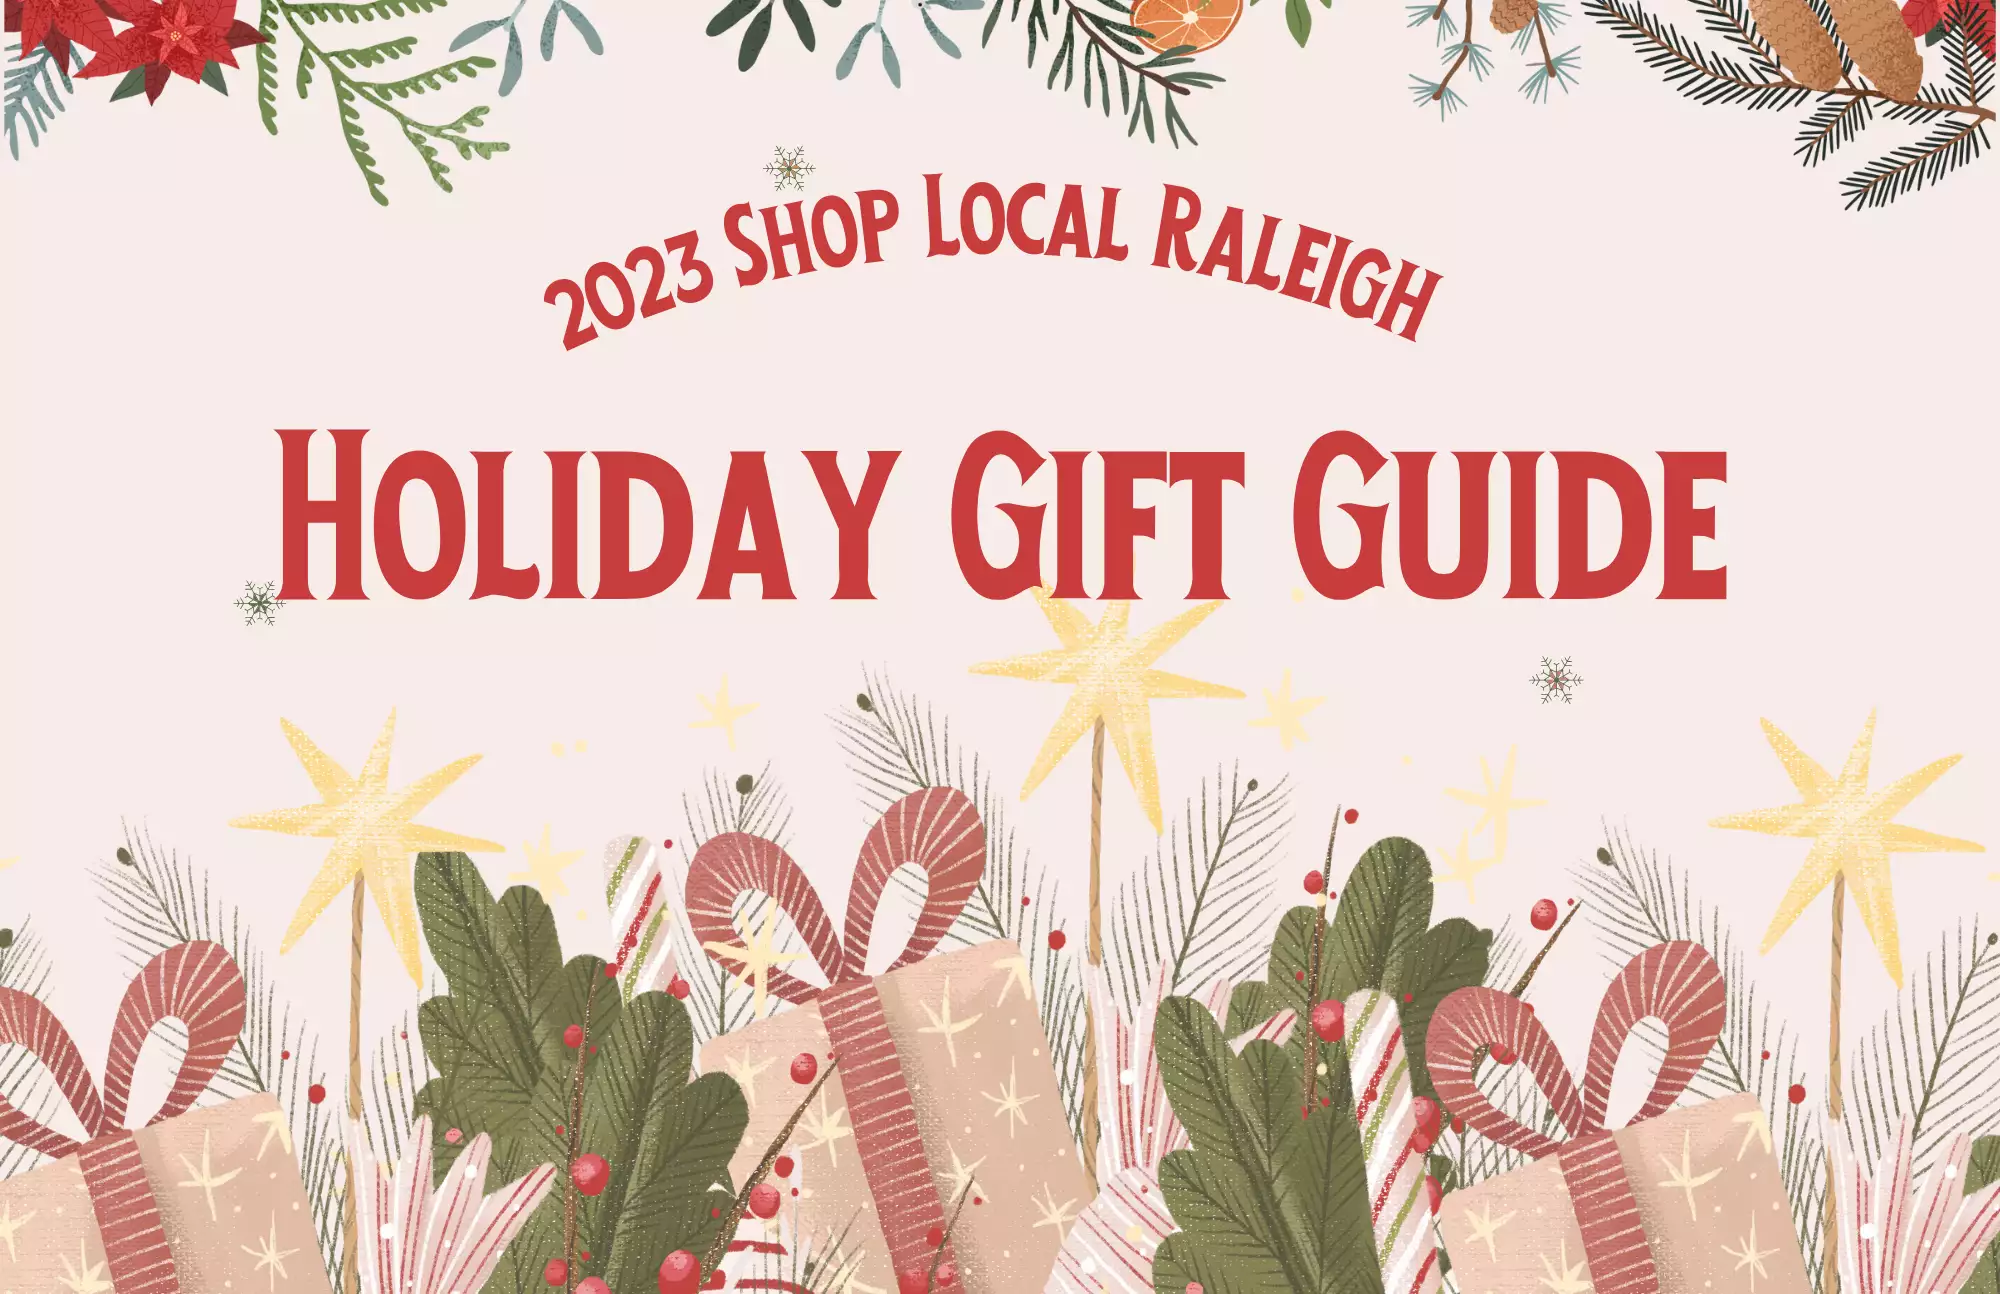 https://shoplocalraleighor16d10.zapwp.com/q:ultra/r:0/wp:1/w:1/u:https://shoplocalraleigh.org/wp-content/uploads/2022/11/2022-Holiday-Gift-Guide.png